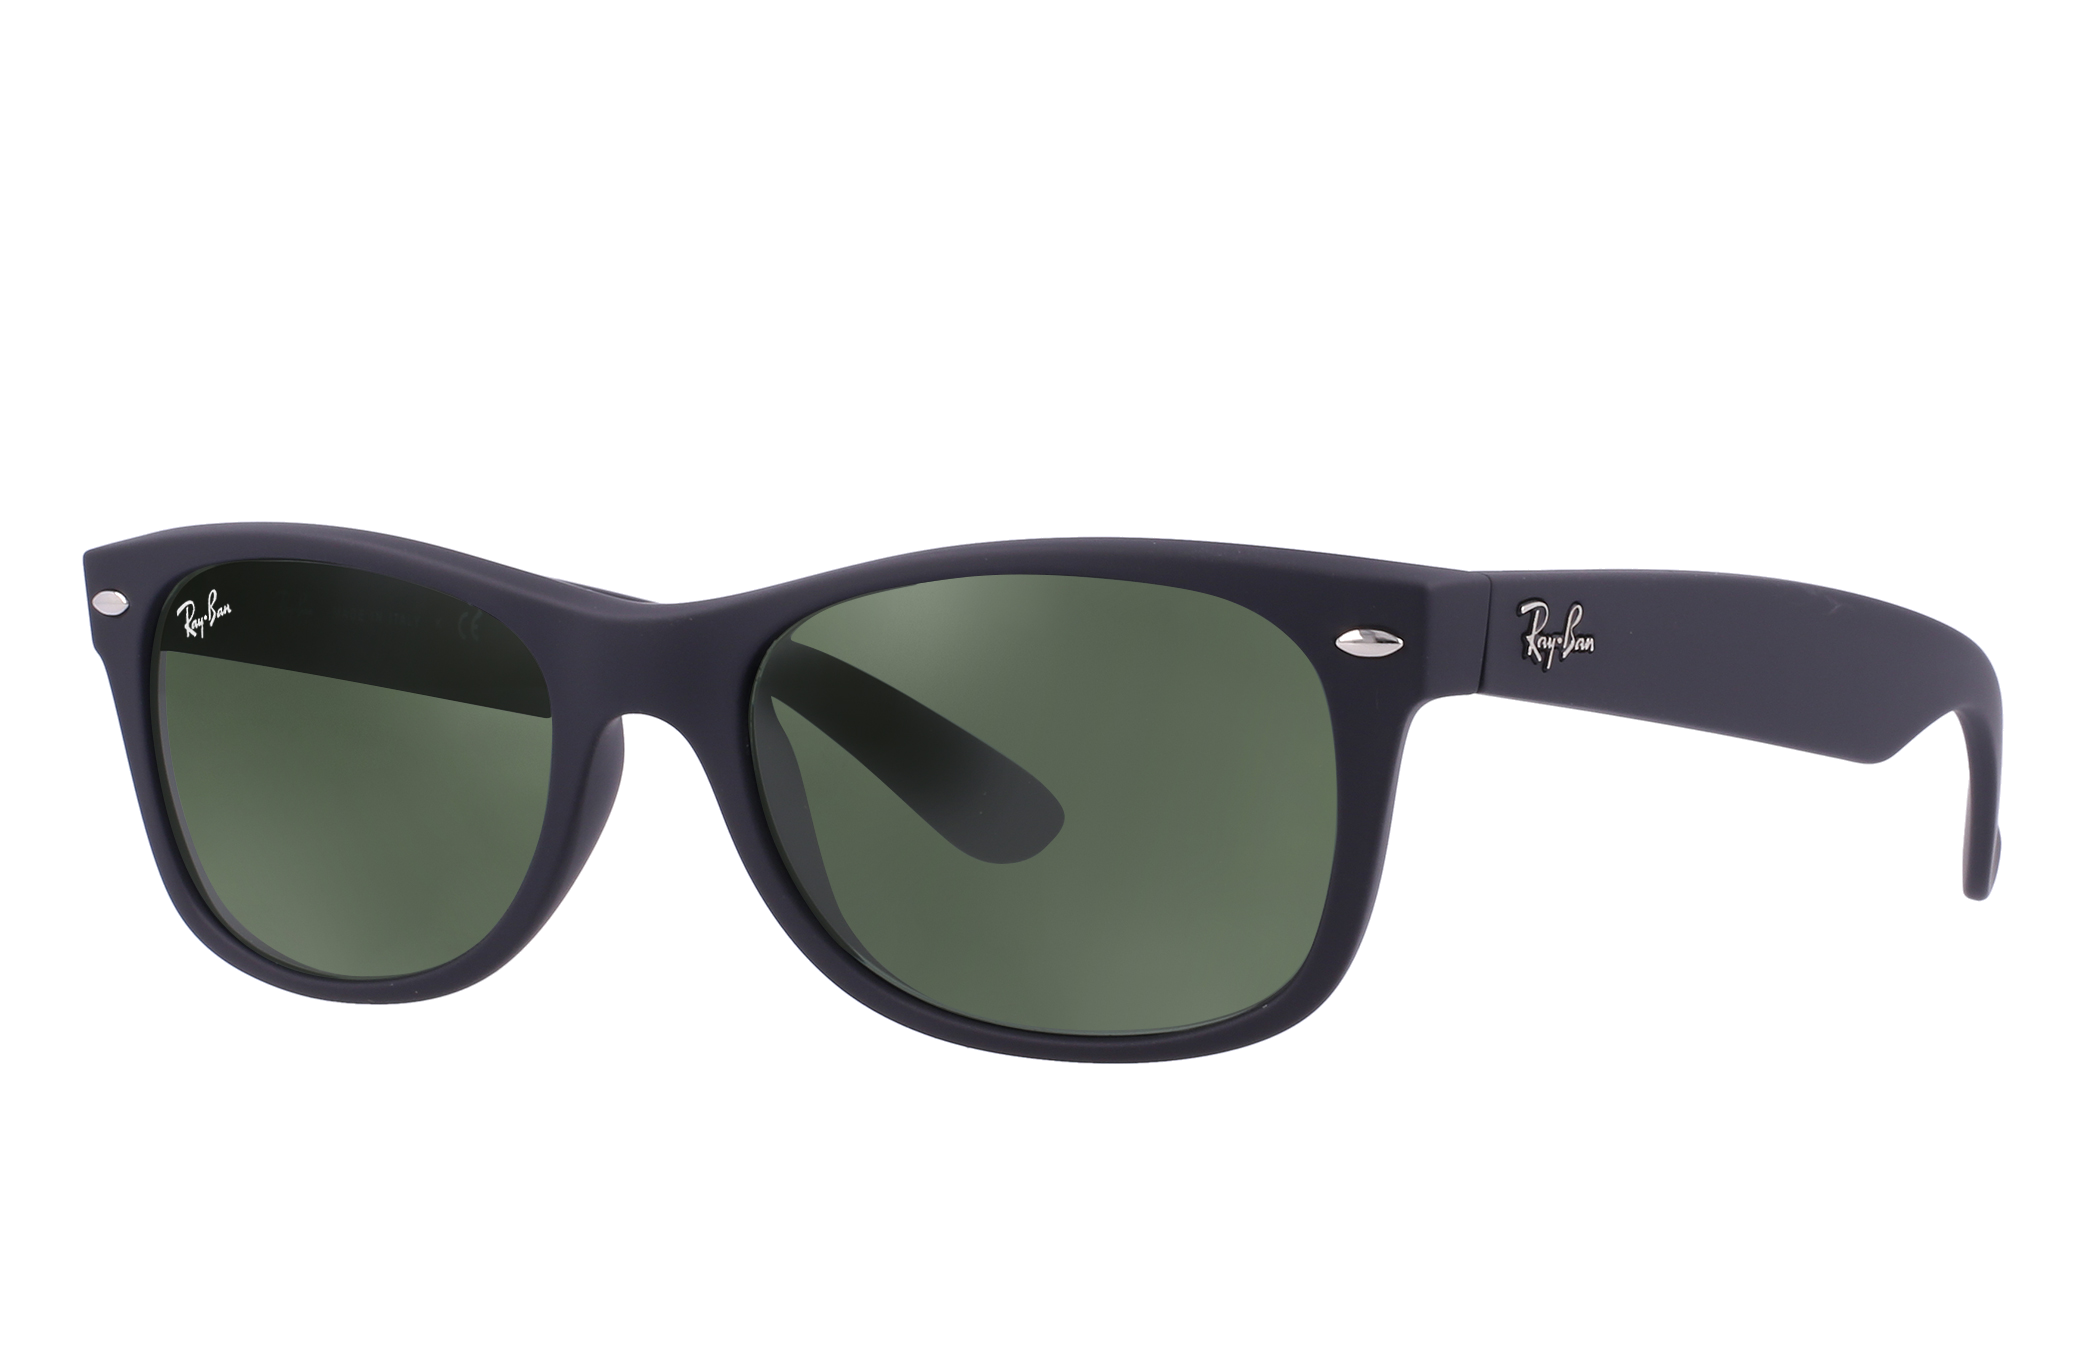 ray ban 2132 frames only